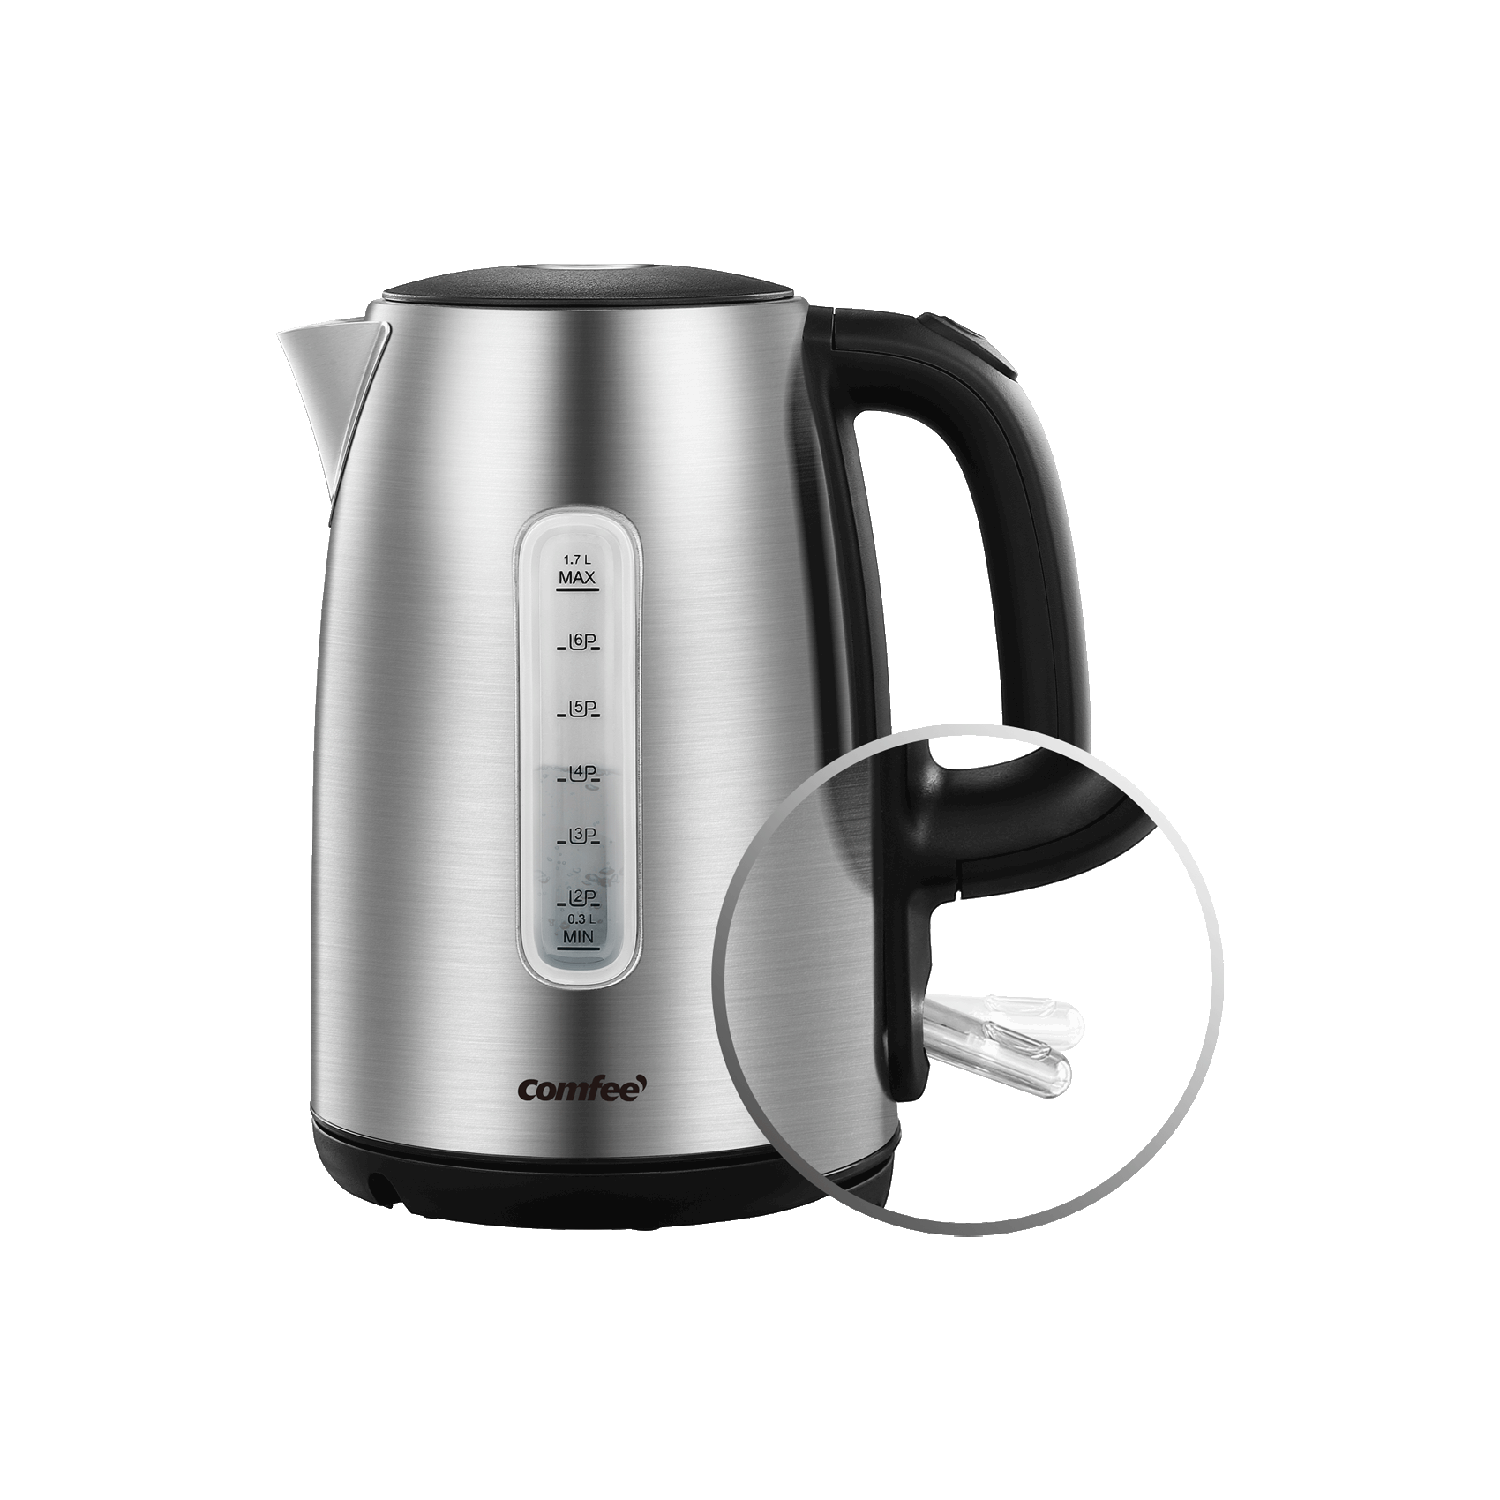 https://d1pjg4o0tbonat.cloudfront.net/content/dam/comfee-aem/global/products/small-appliances/stainless-steel-cordless-electric-kettle/kv3.png/jcr:content/renditions/cq5dam.compression.png